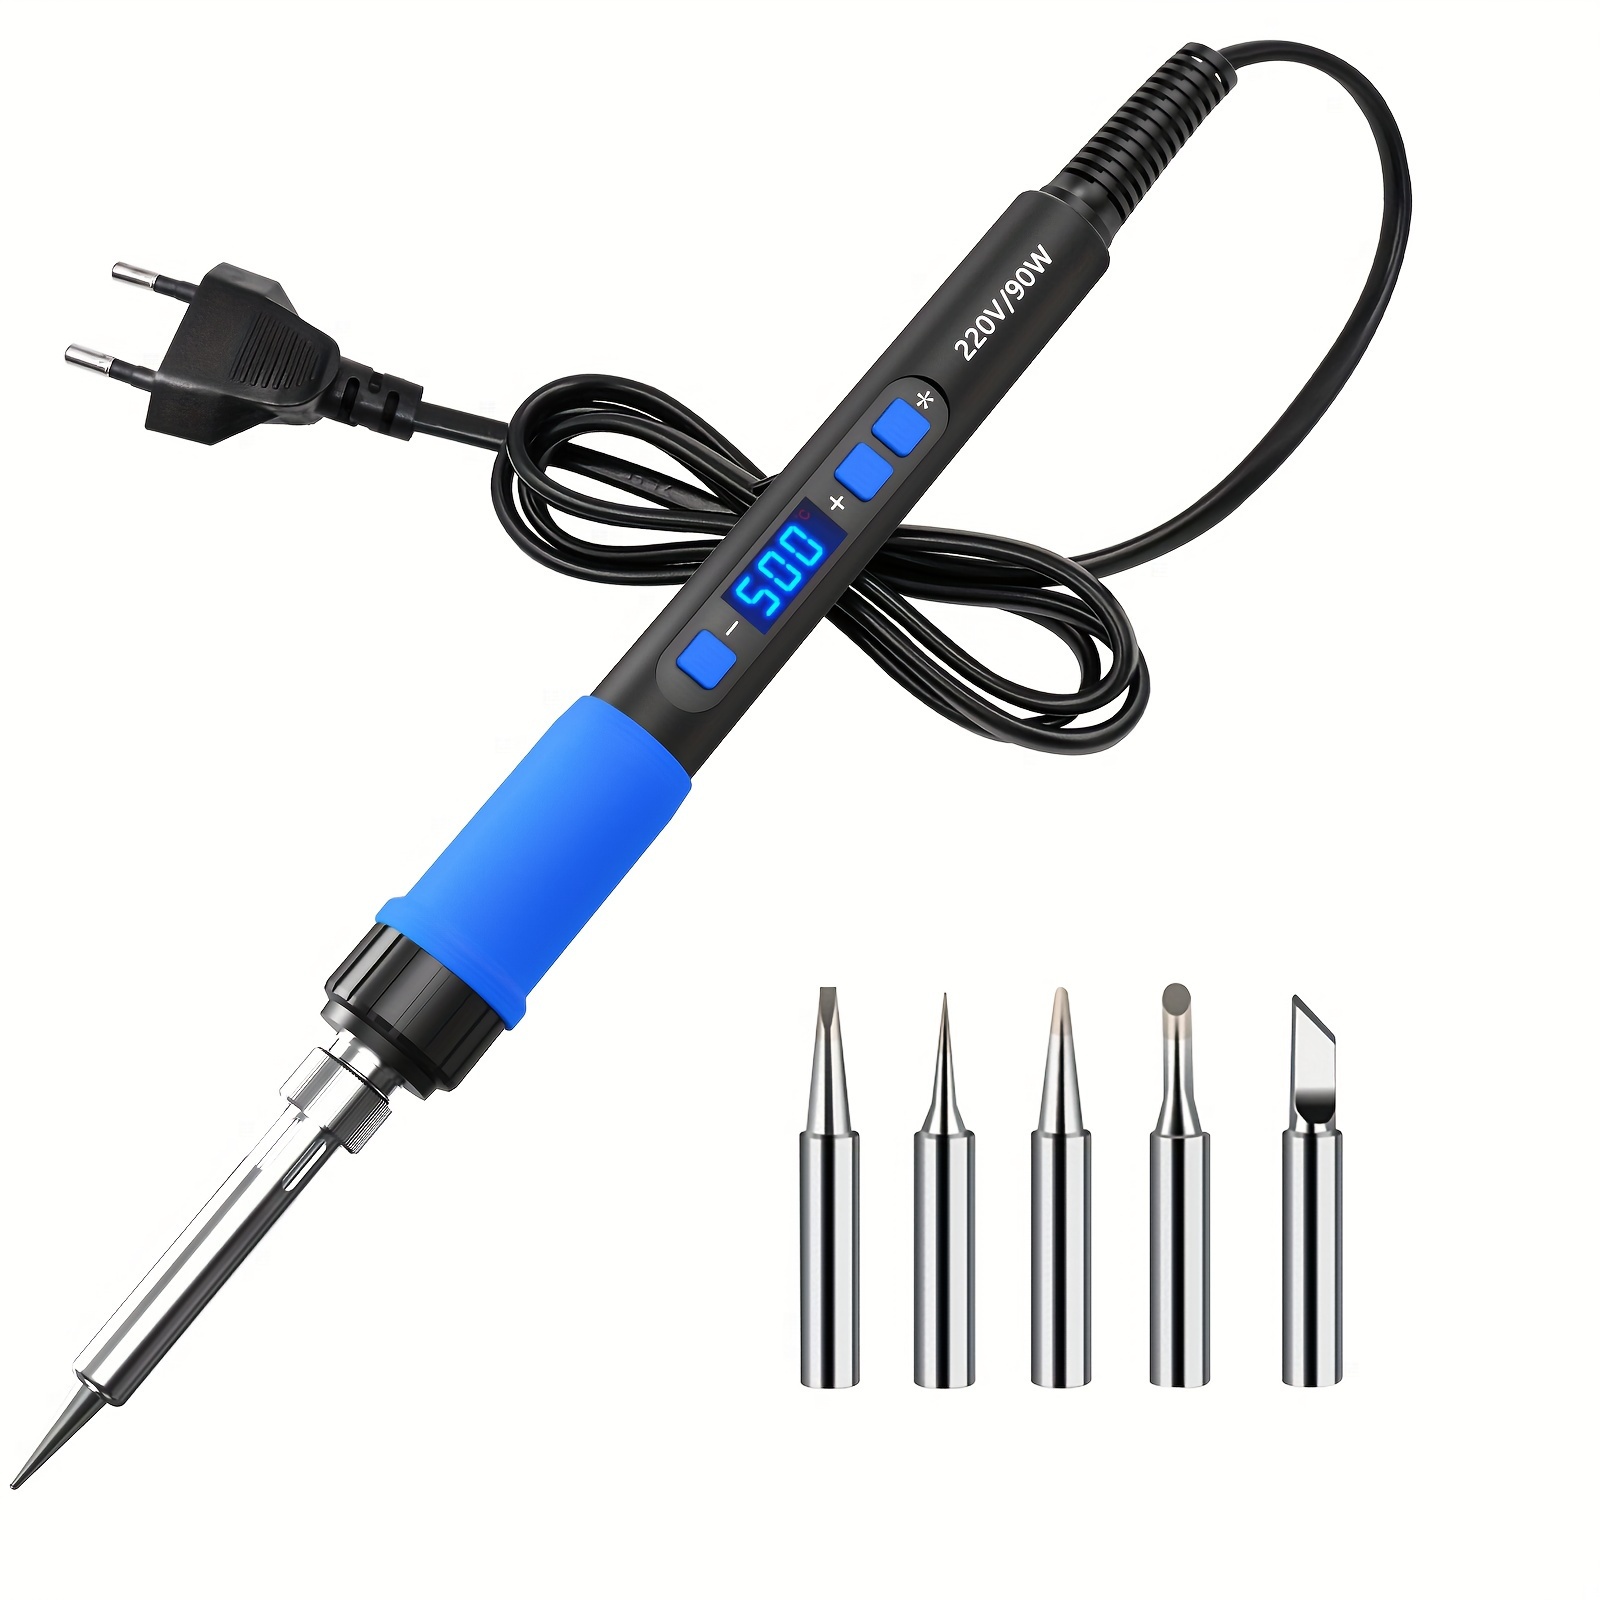 

Soldering Iron Kit, Ilibilib 220v 90w Lcd Digital Display Adjustable Temperature Solder Iron 180 To 500°c, 6-in-1 Thermostatic Rapid Heating Smart Welding Iron Kit For Soldering Diy Repair (blue)